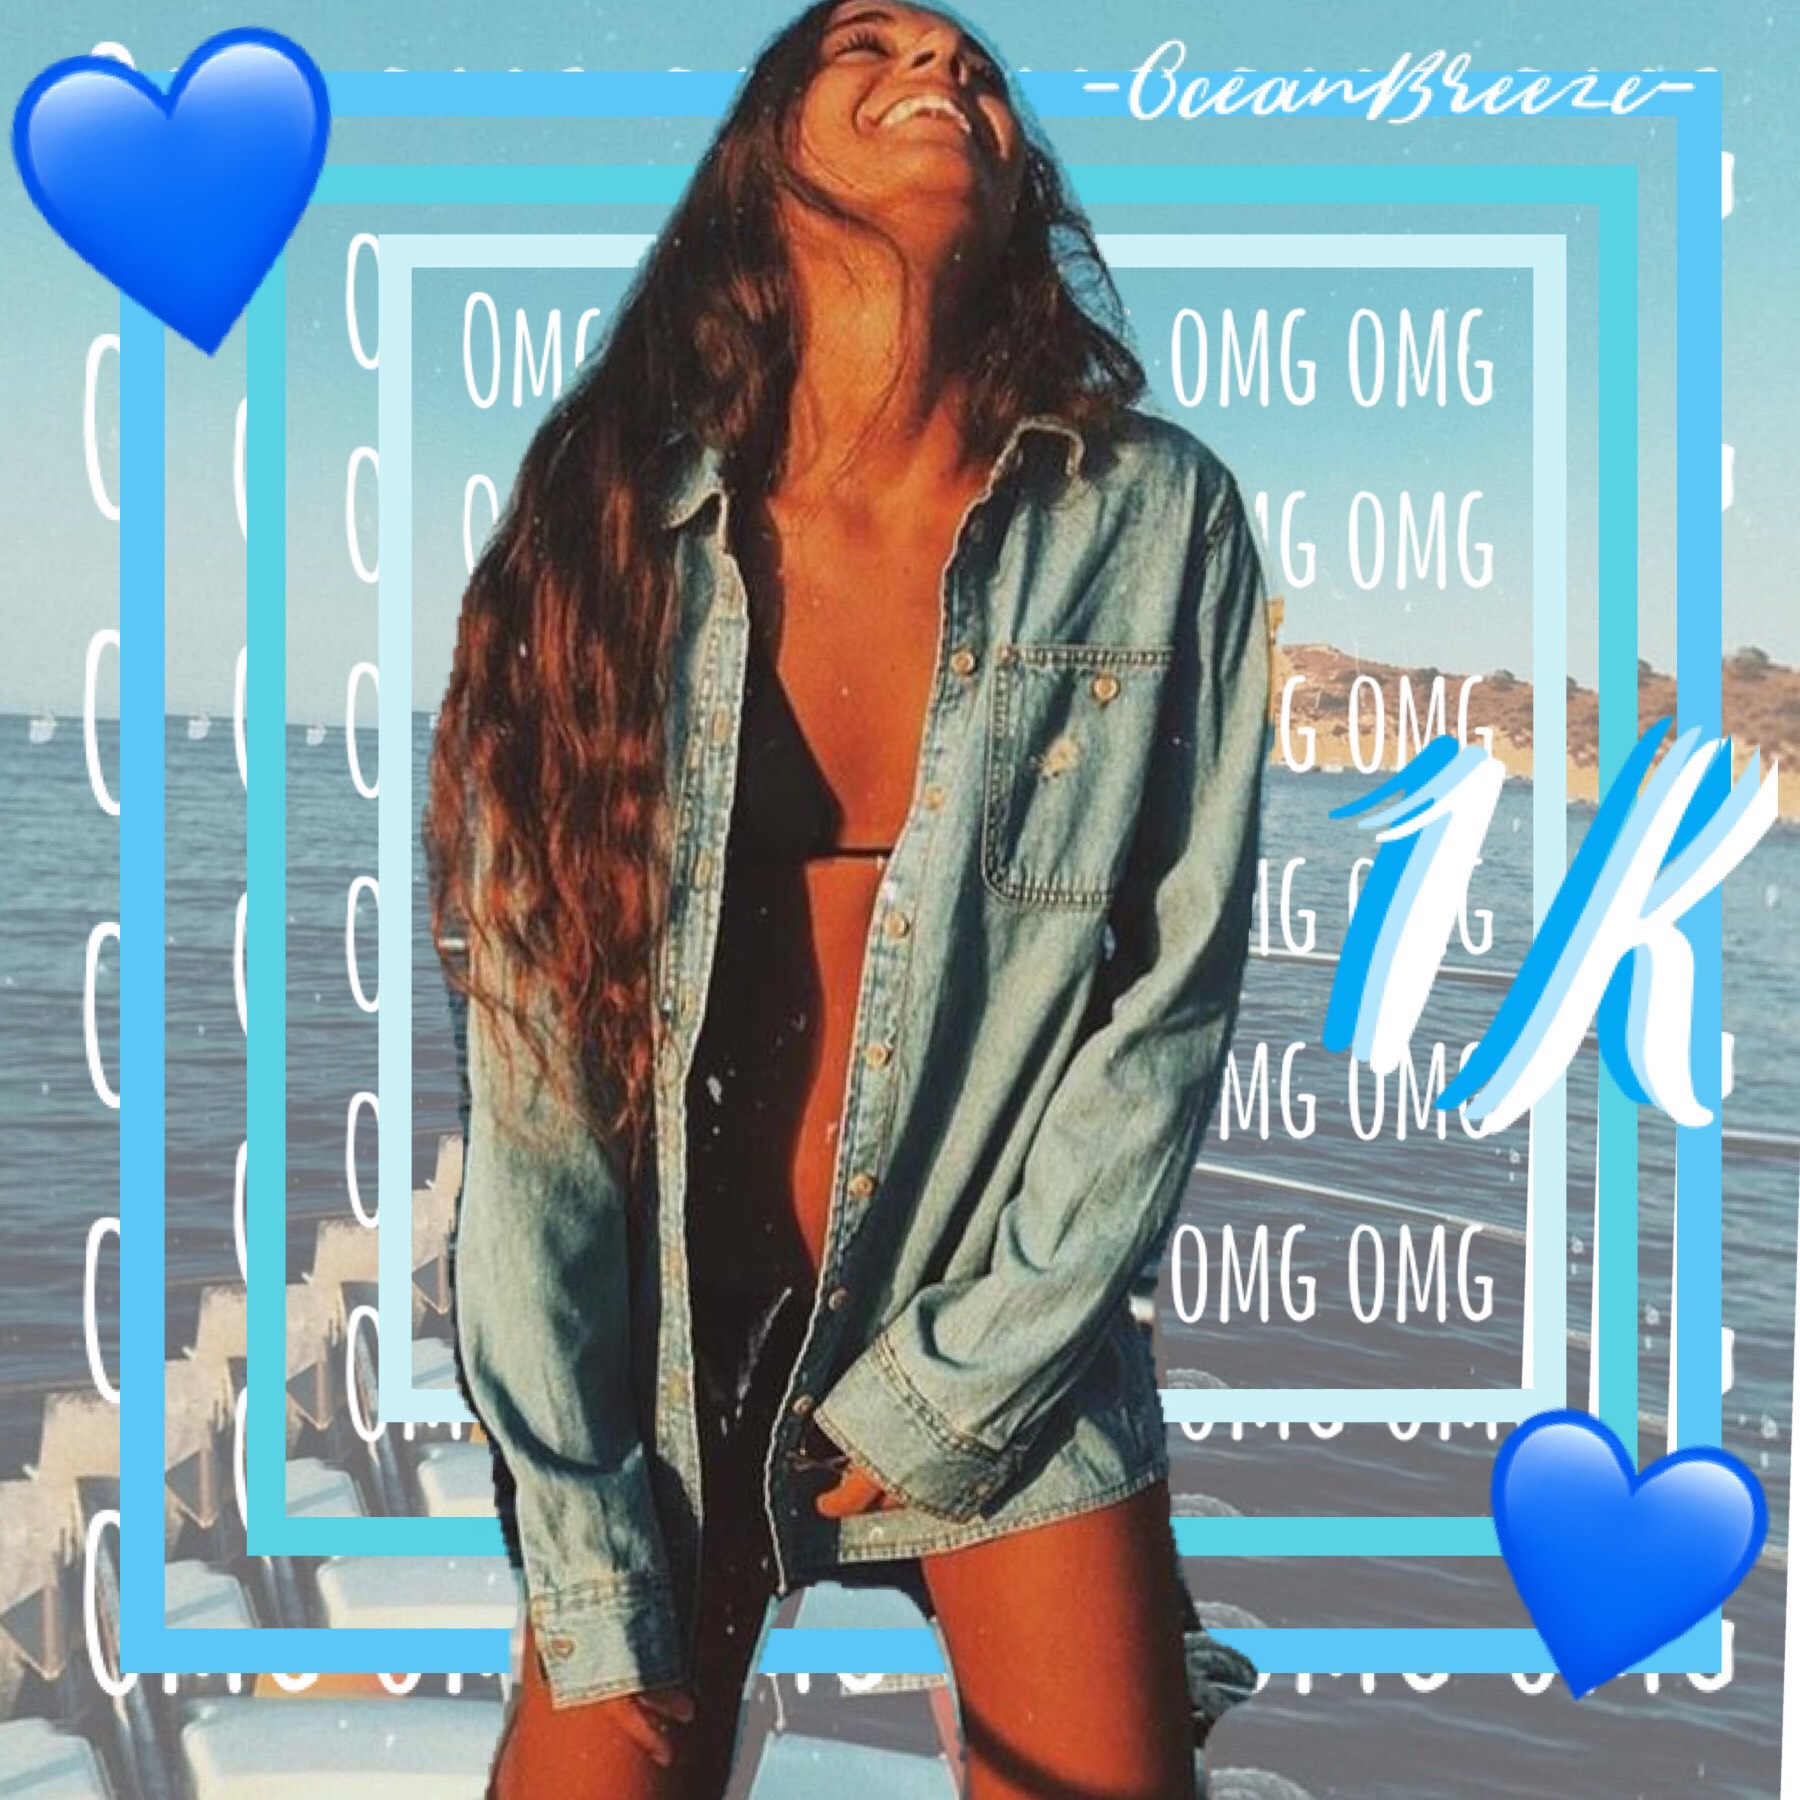 💕Tap💕
💕Omg guys we made it to 1k I have been on PC since the start of December (around the 9th) and now it is the 20th of Feb and I have had 1000 amazing people press that follow button!!! Thanks you all soooooo much!! I’m so excited!!! What should I do??